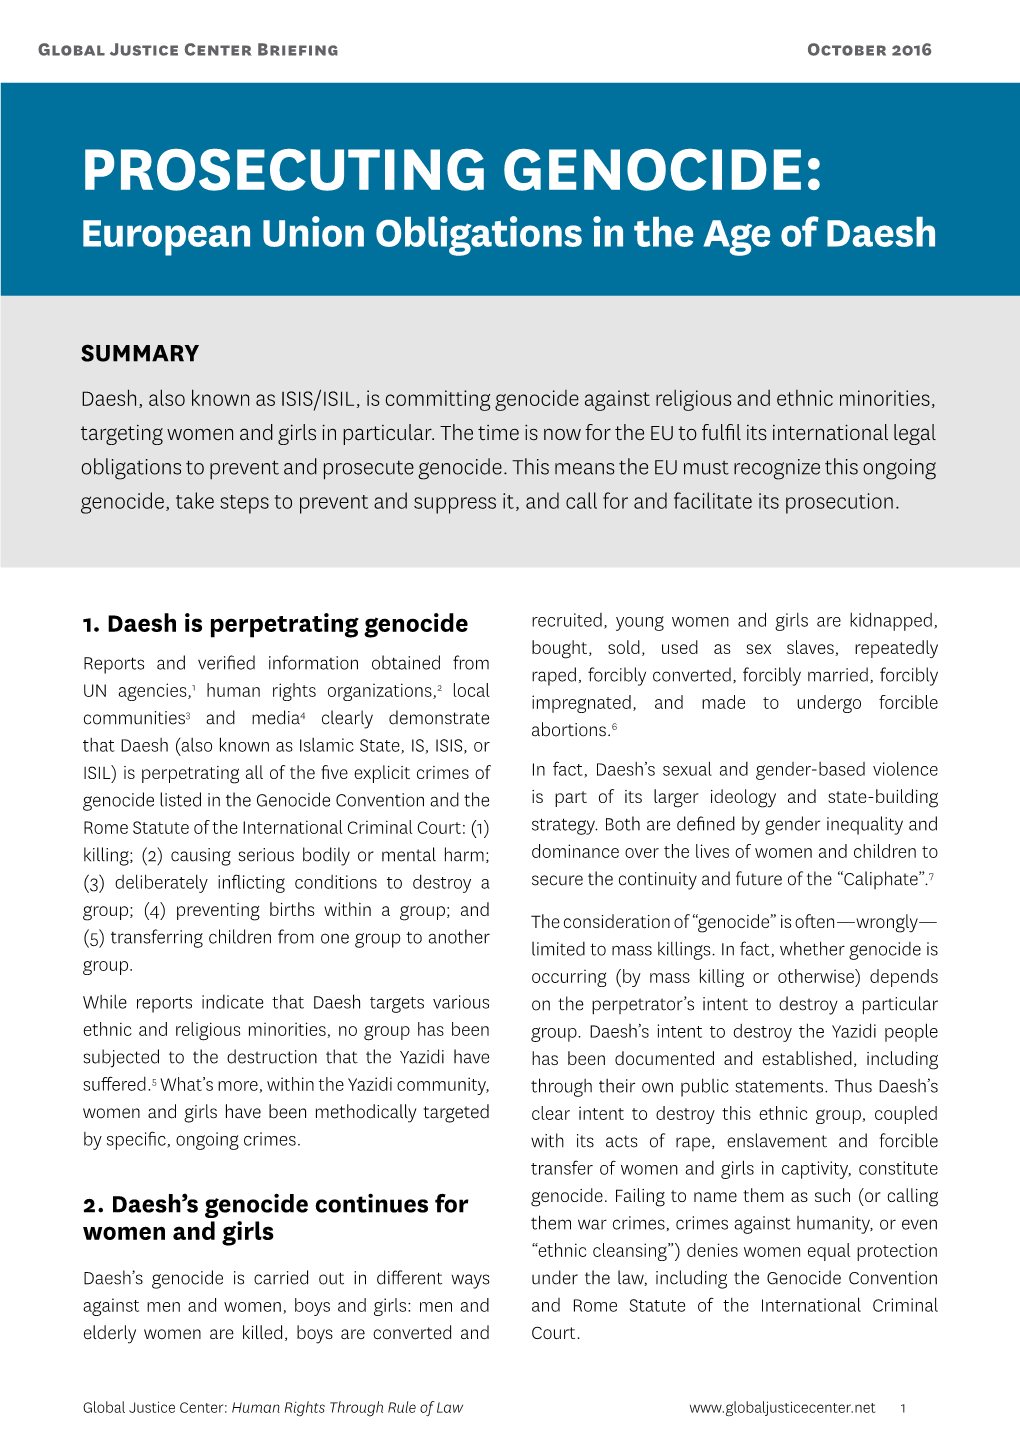 PROSECUTING GENOCIDE: European Union Obligations in the Age of Daesh